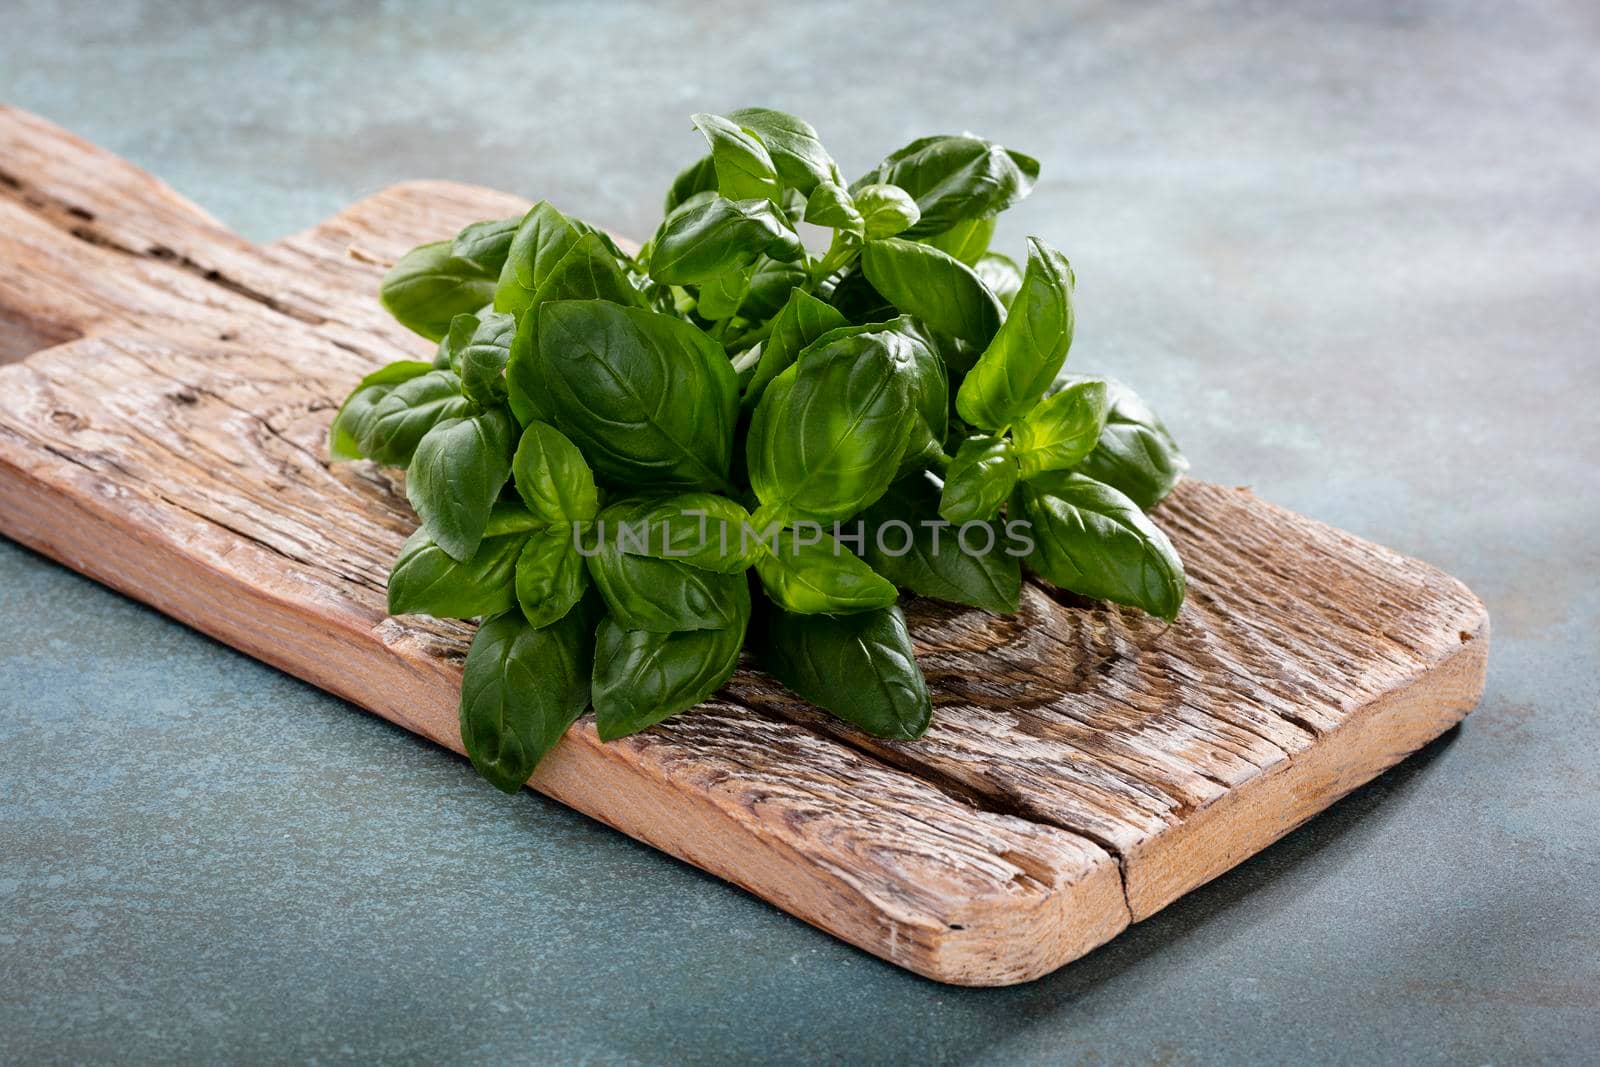 Bunch of fresh organic basil in cutting board on rustic wooden background by gitusik